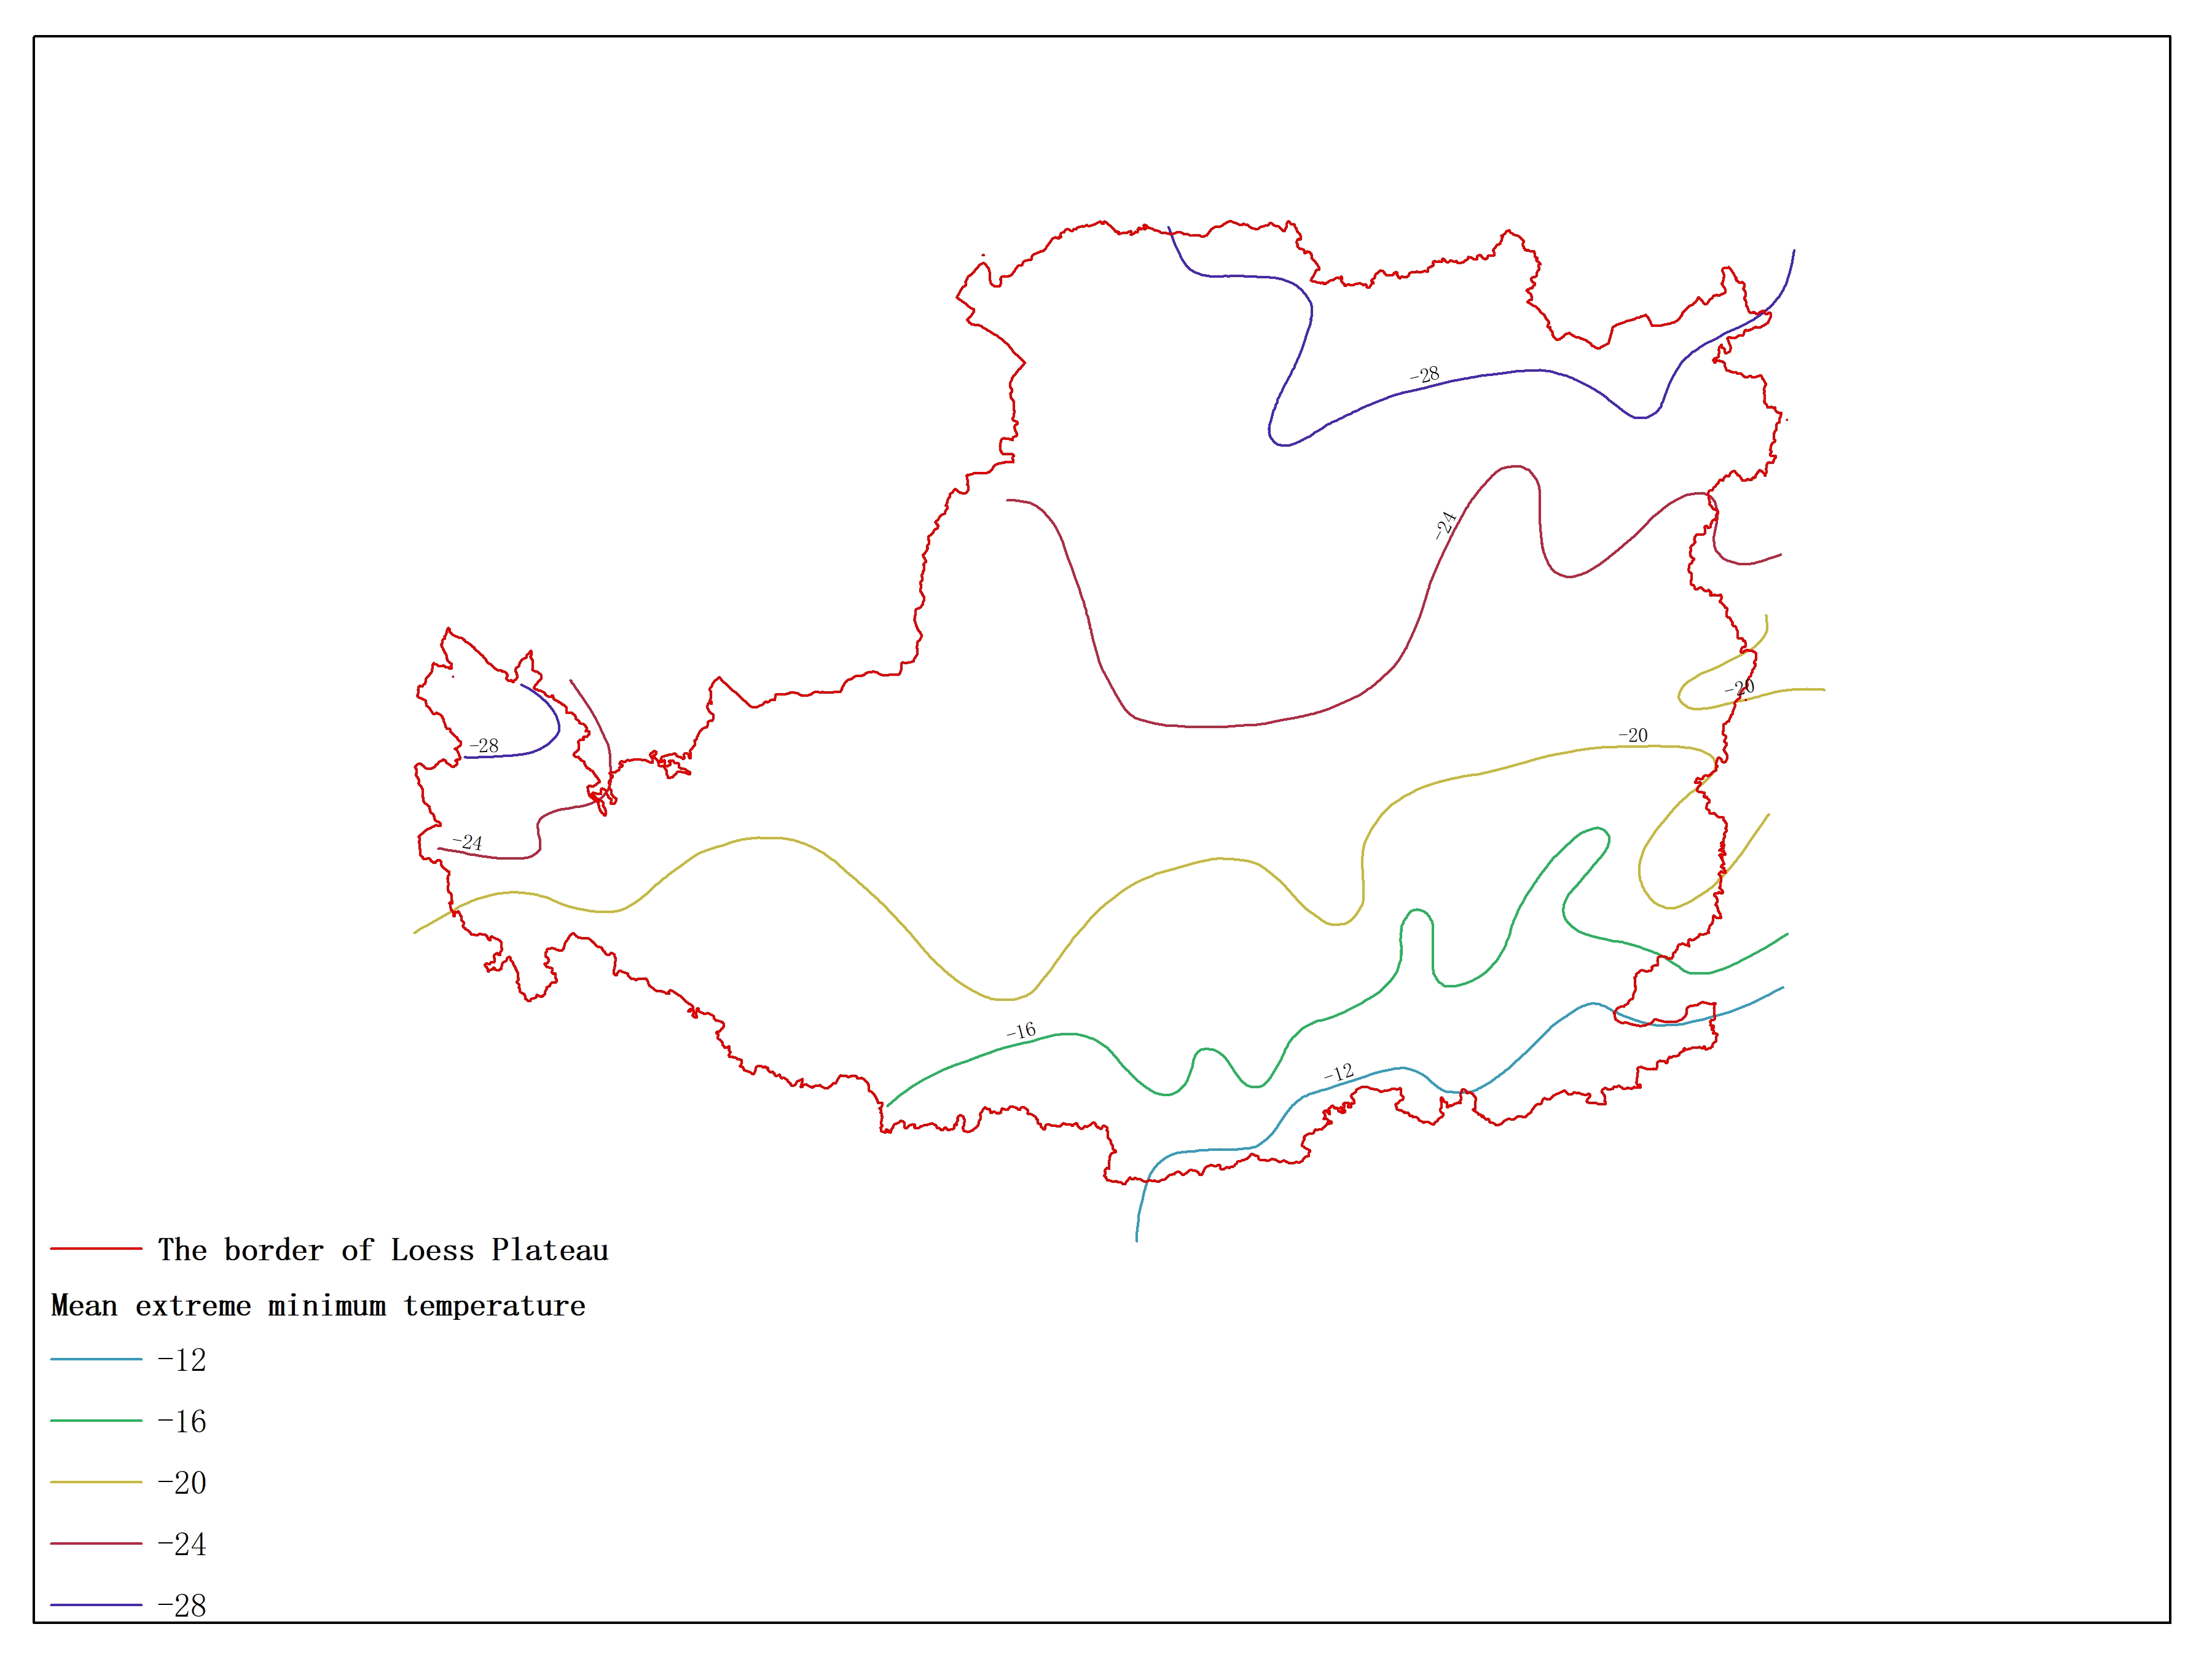 Agricultural climate resource atlas of Loess Plateau-Mean extreme minimum temperature